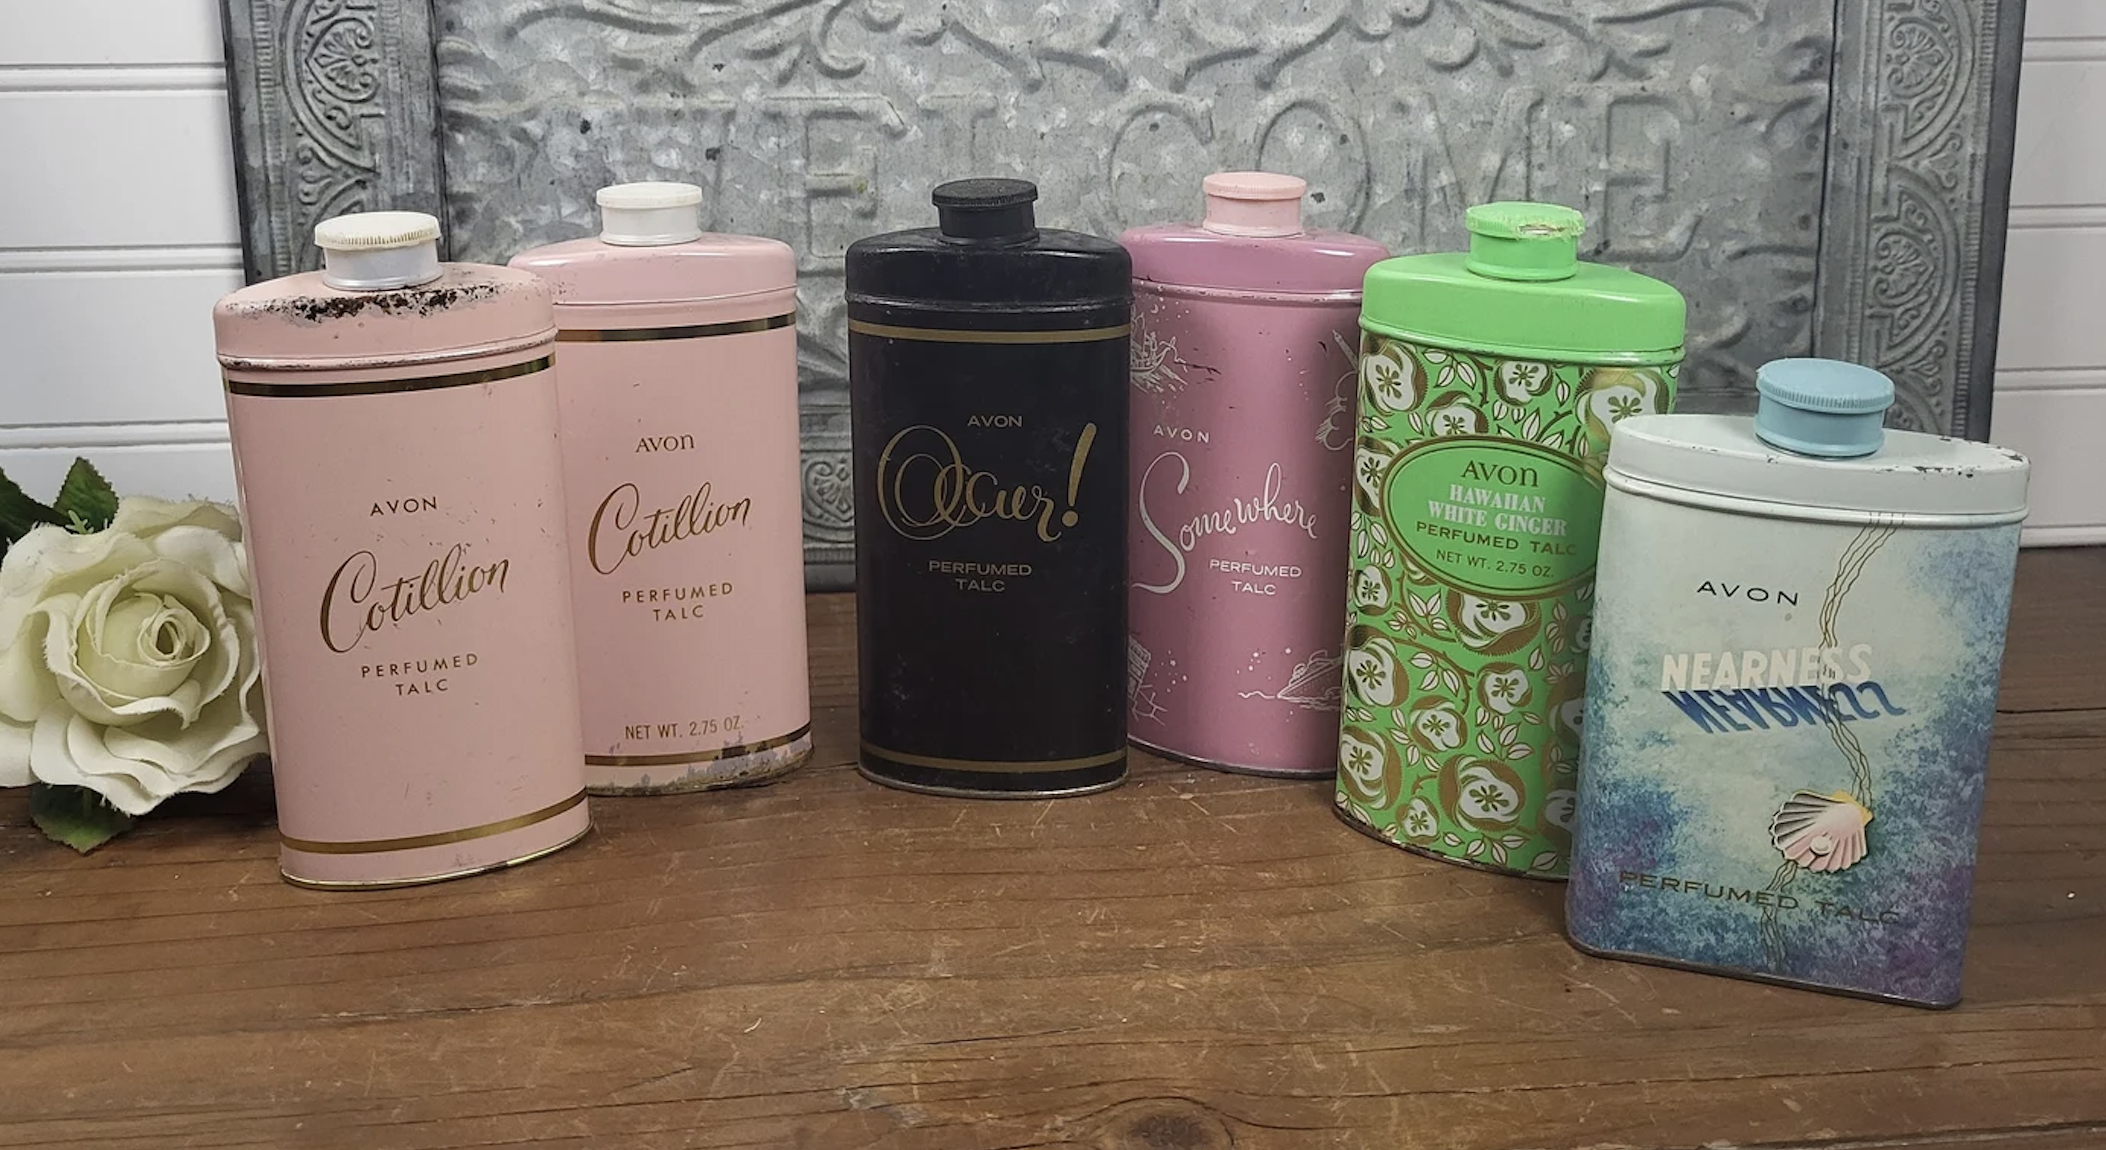 Six vintage Avon perfume talc tins are arranged in a row. The tins feature different labels and designs, with one tin depicting floral patterns